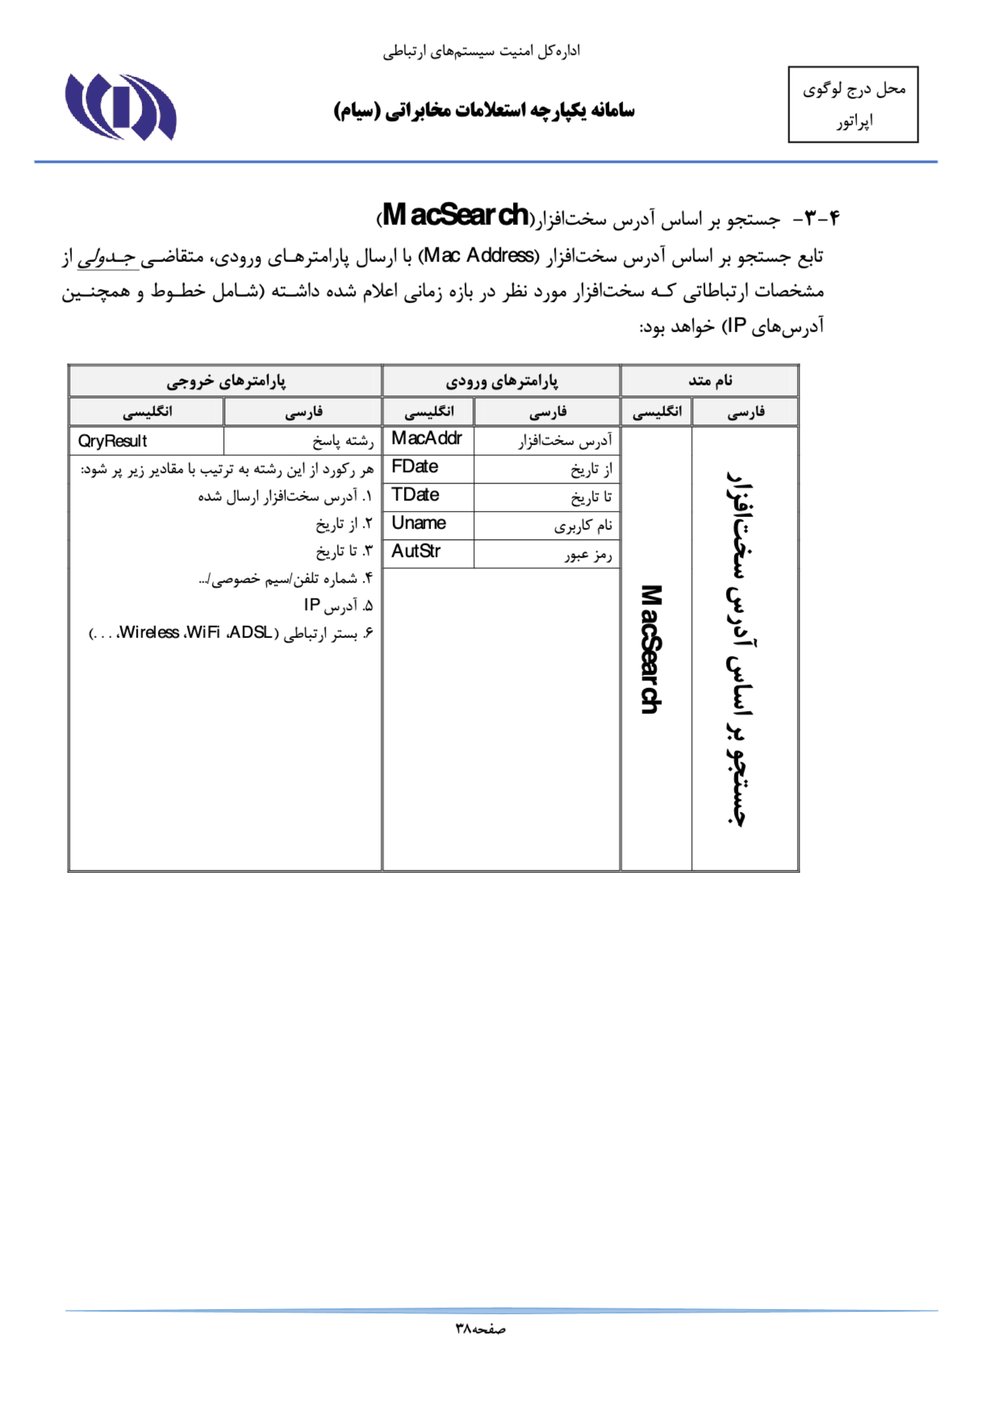 Page 38 from Iran’s SIAM Manual in Persian for Tracking and Controlling Mobile Phones